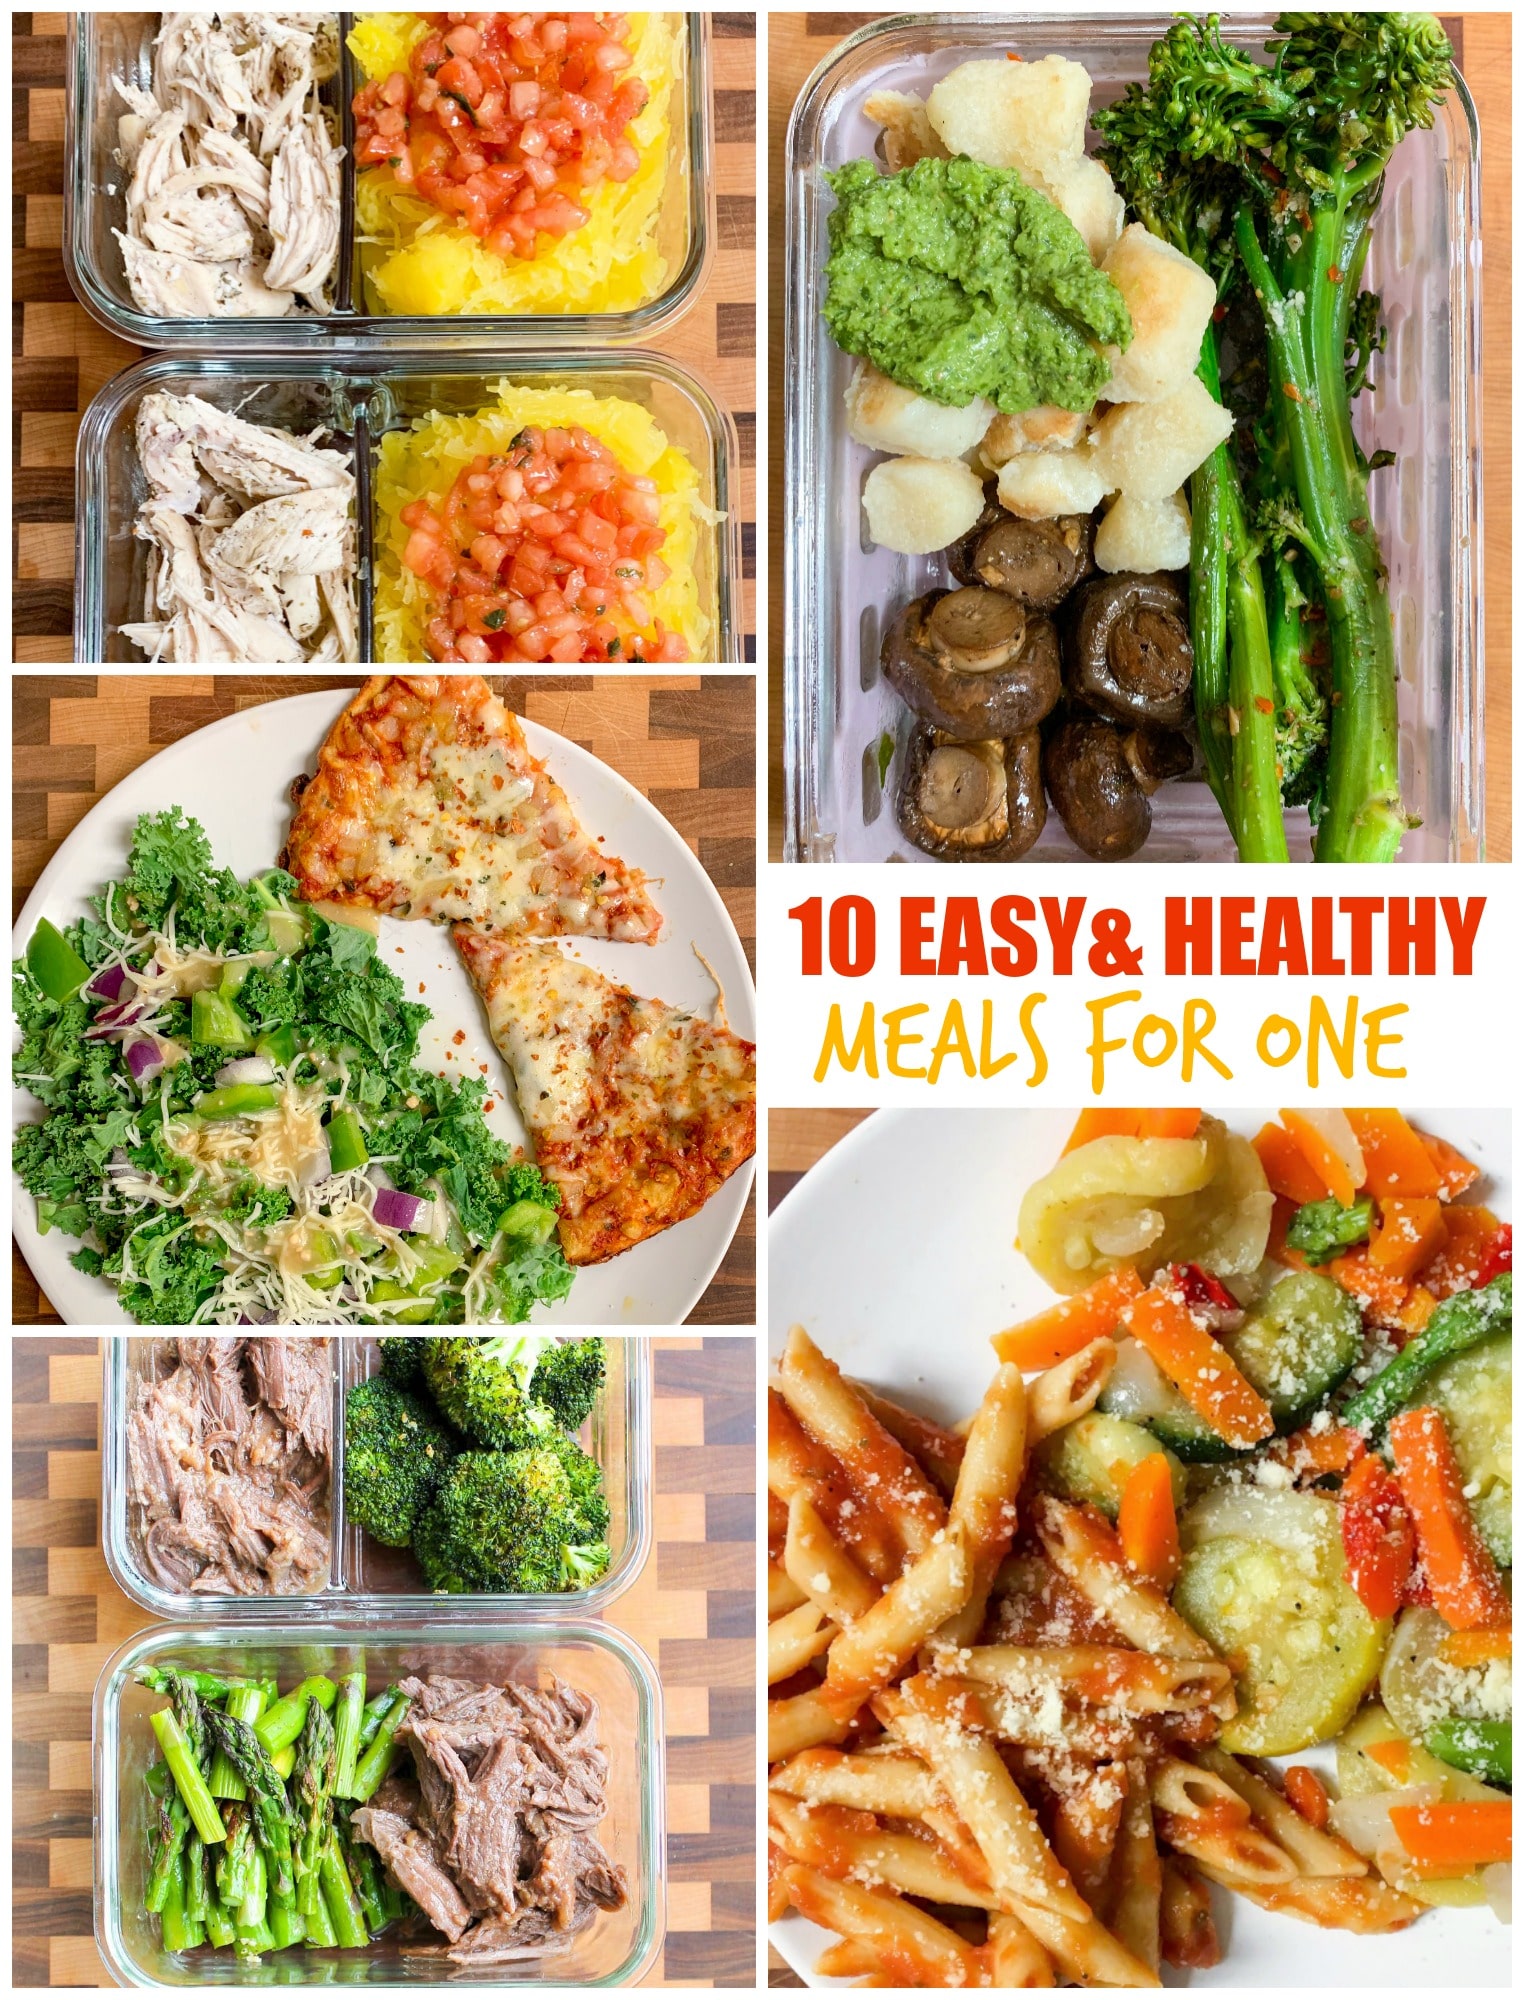 10-easy-and-healthy-meals-for-one-smile-sandwich